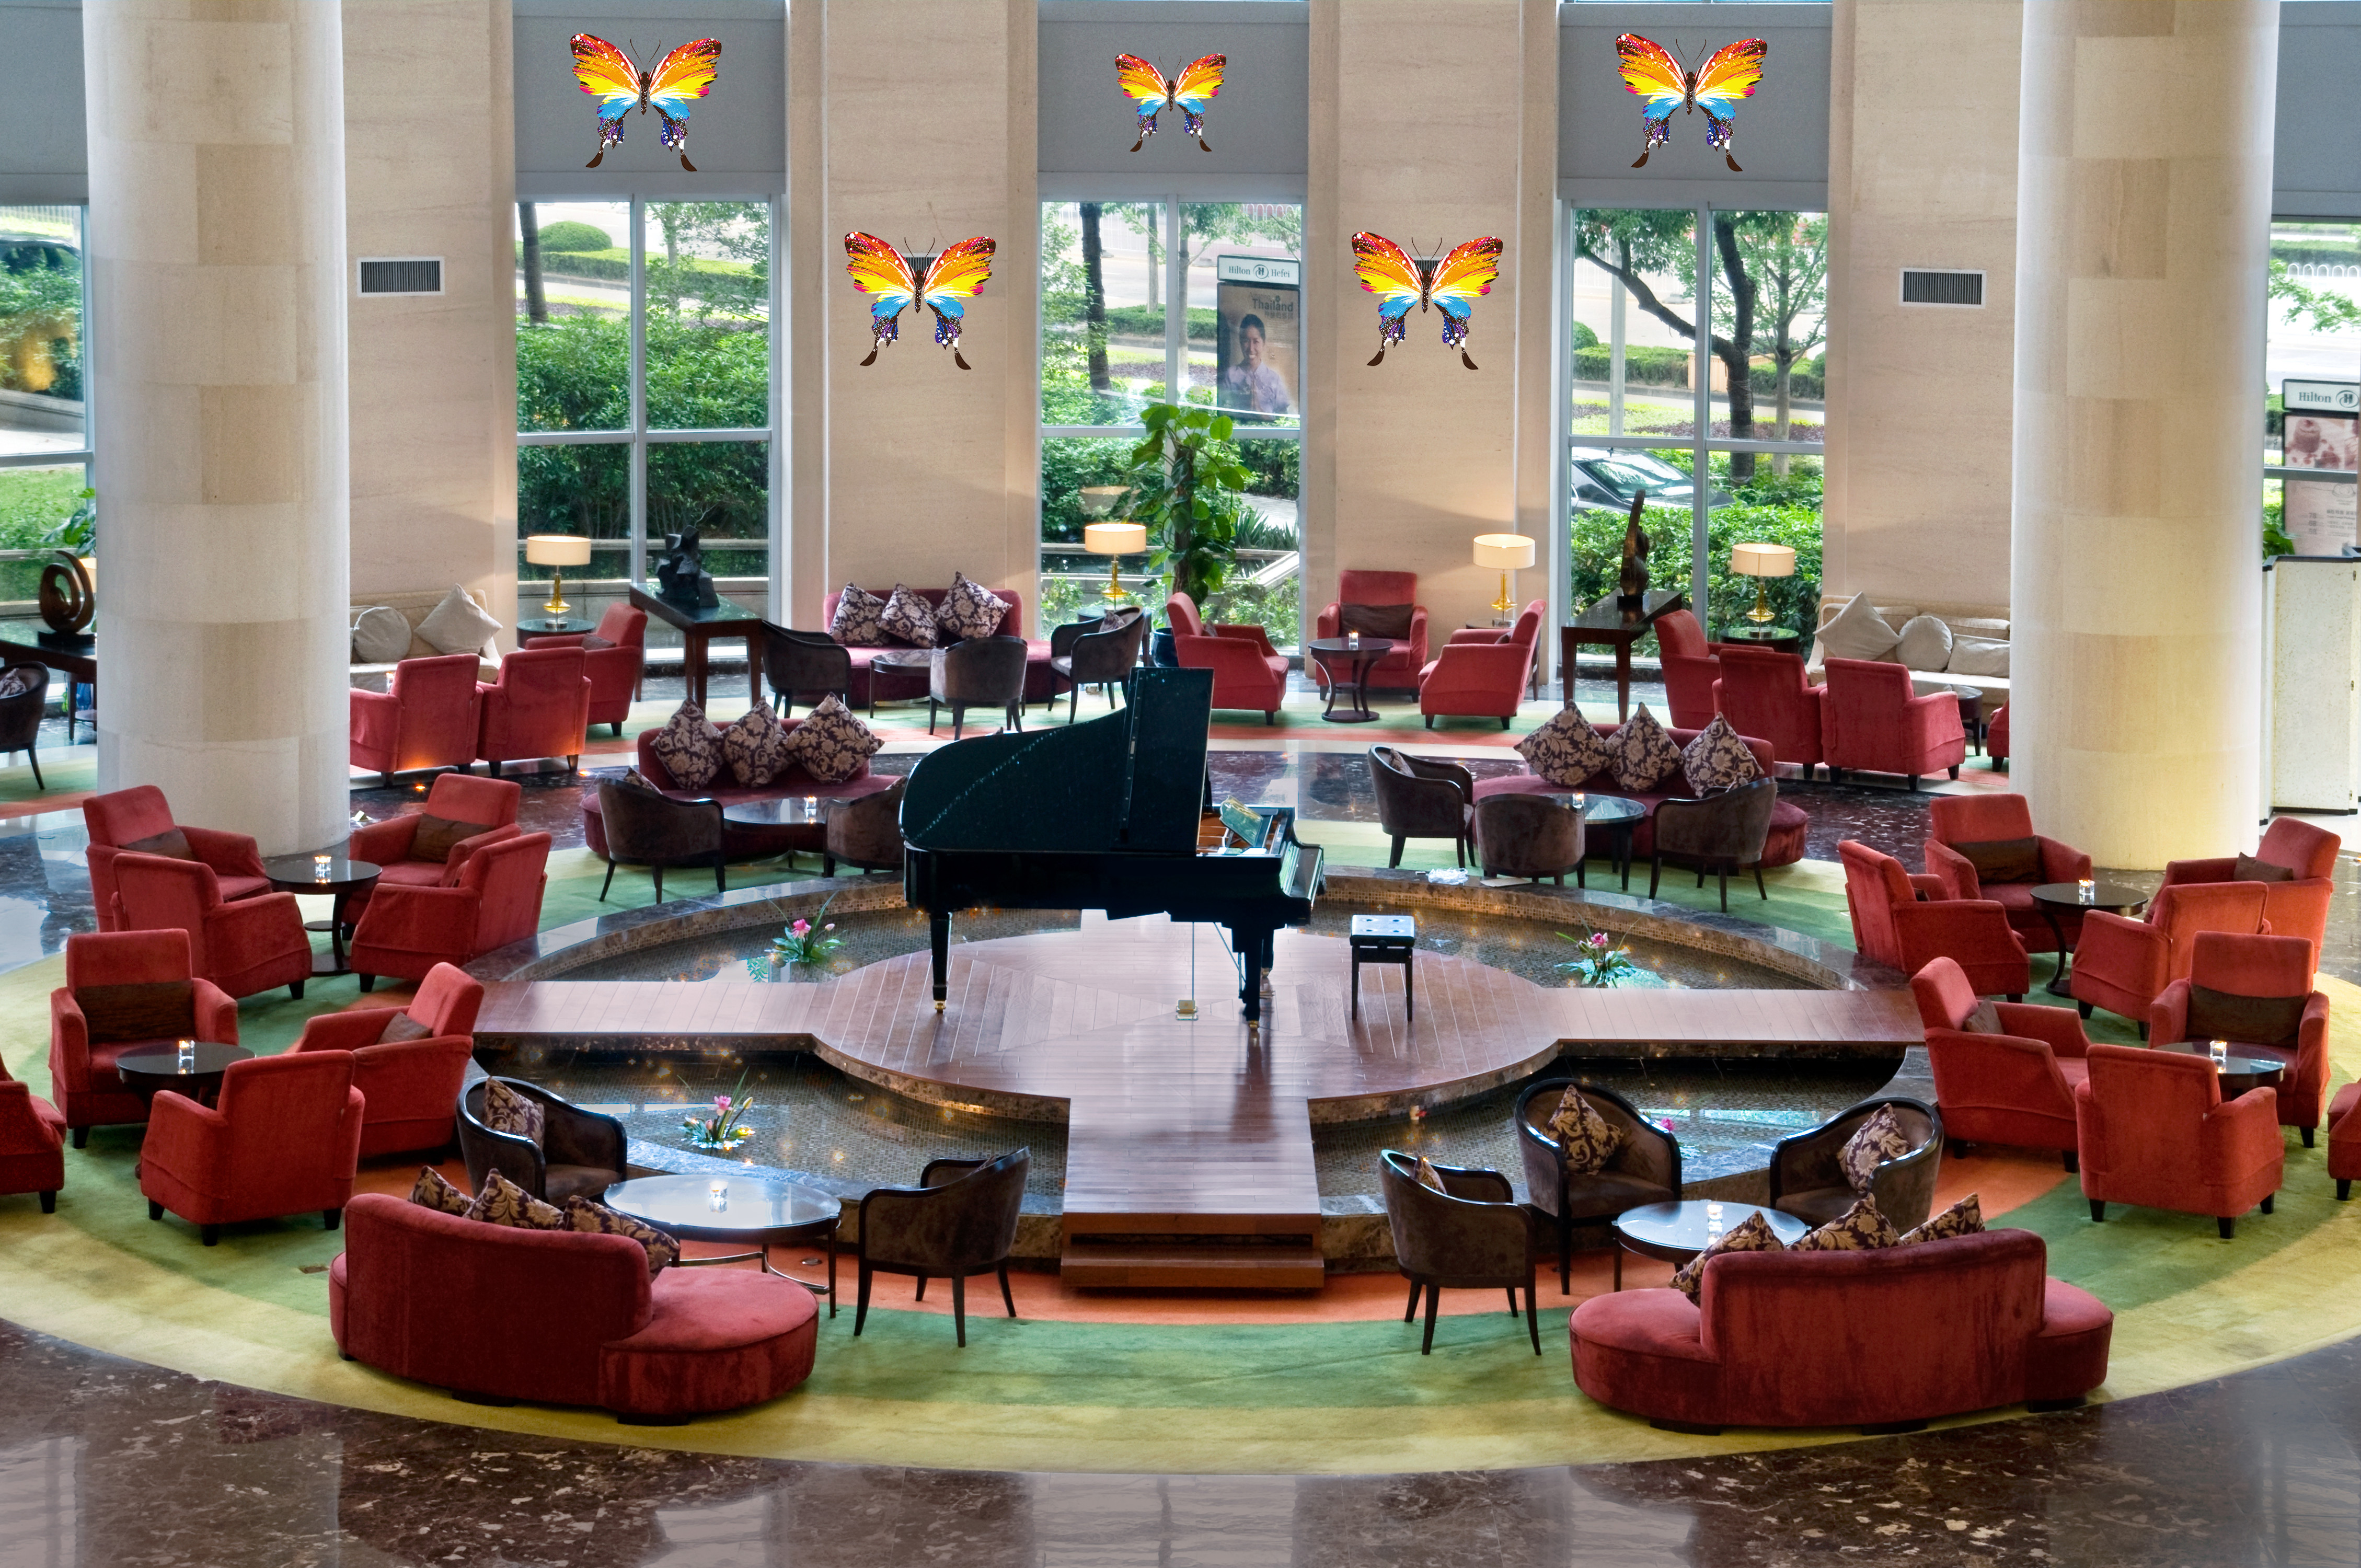 Lobby Seating Area With Piano